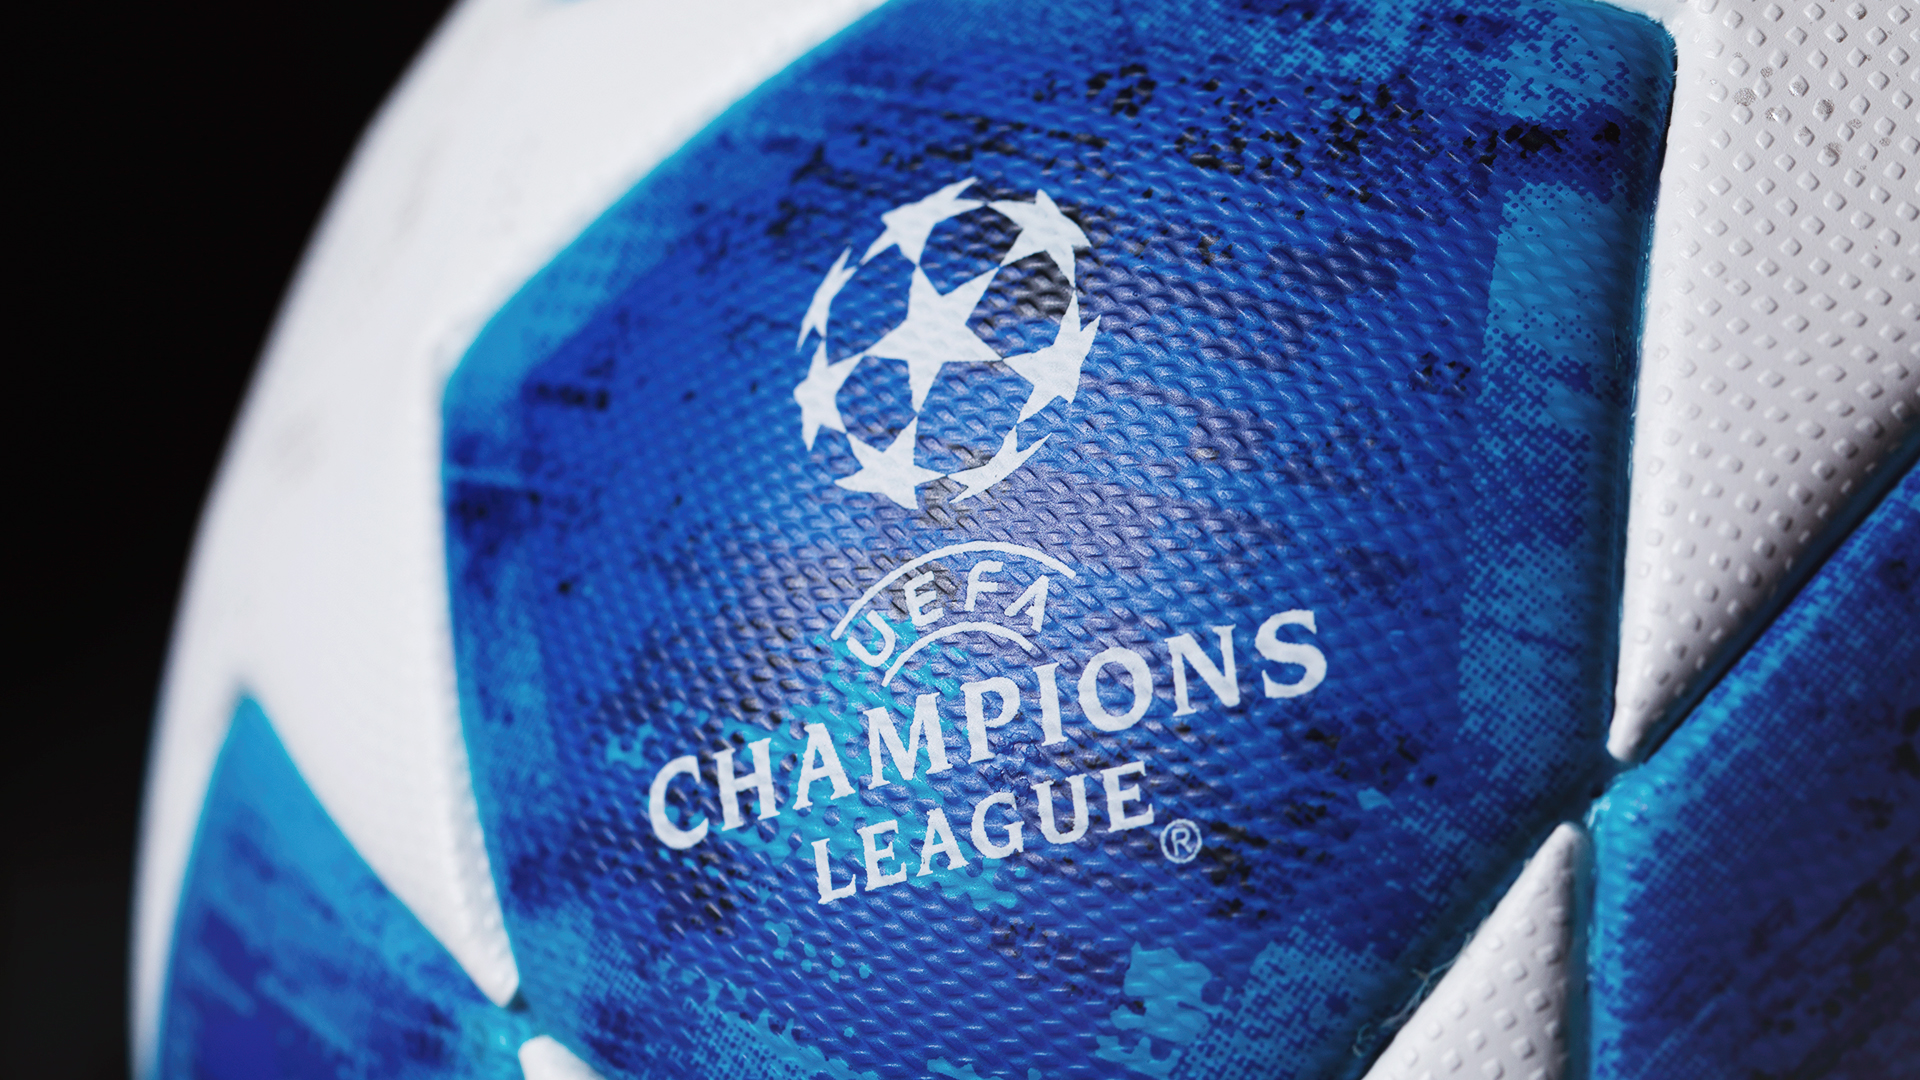 Adidas Just Dropped A Cold New UEFA Champions League Match Ball For 2018 19